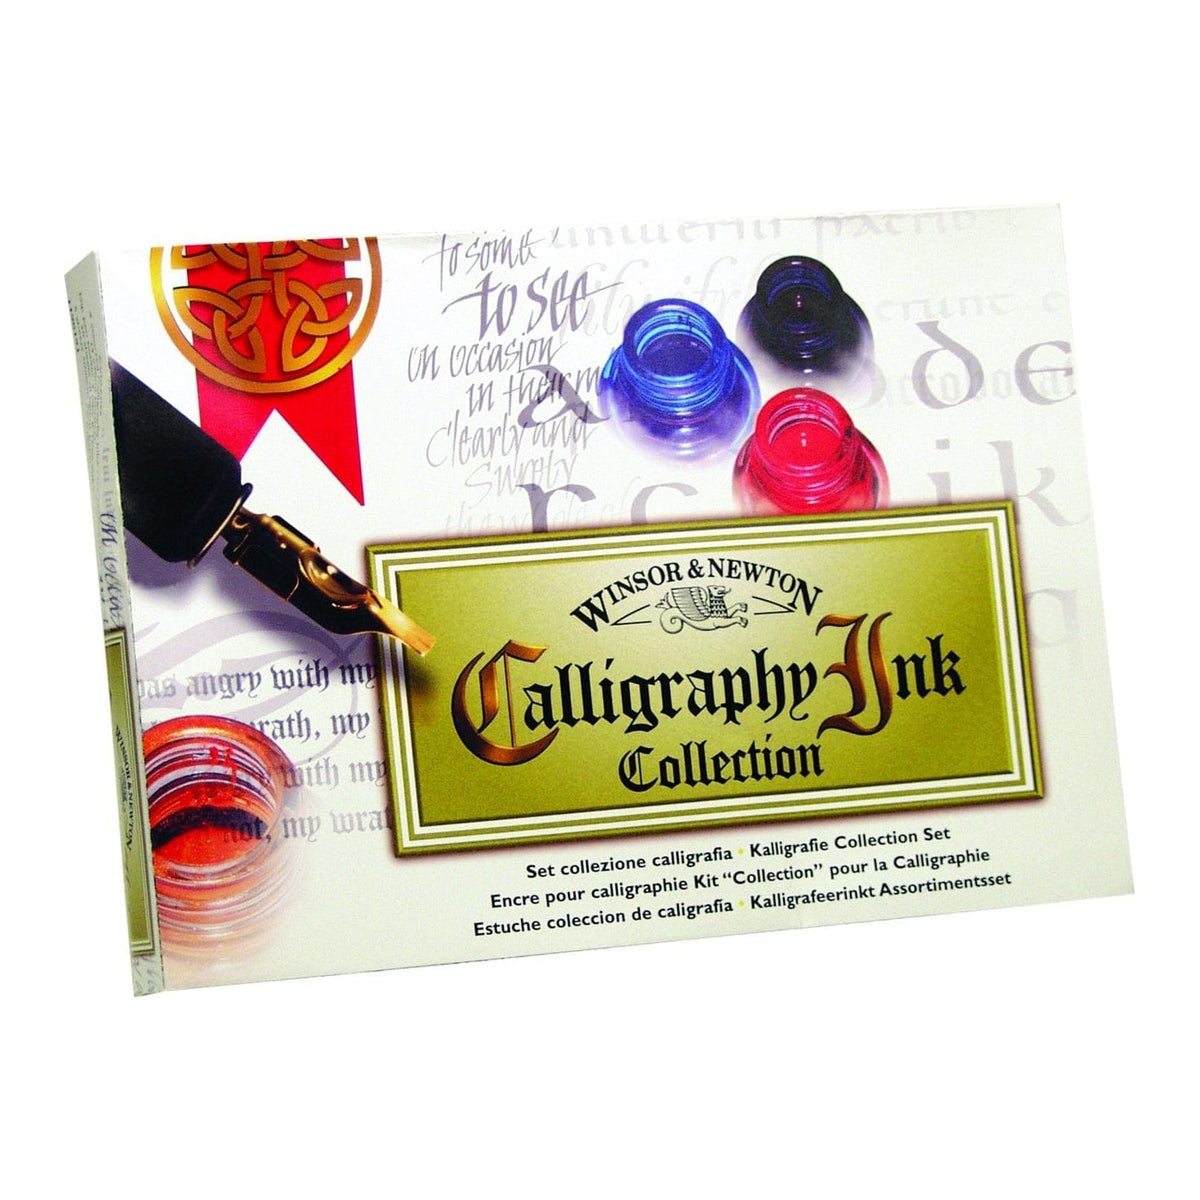 Calligraphy Ink Introductory Set 30ml bottles